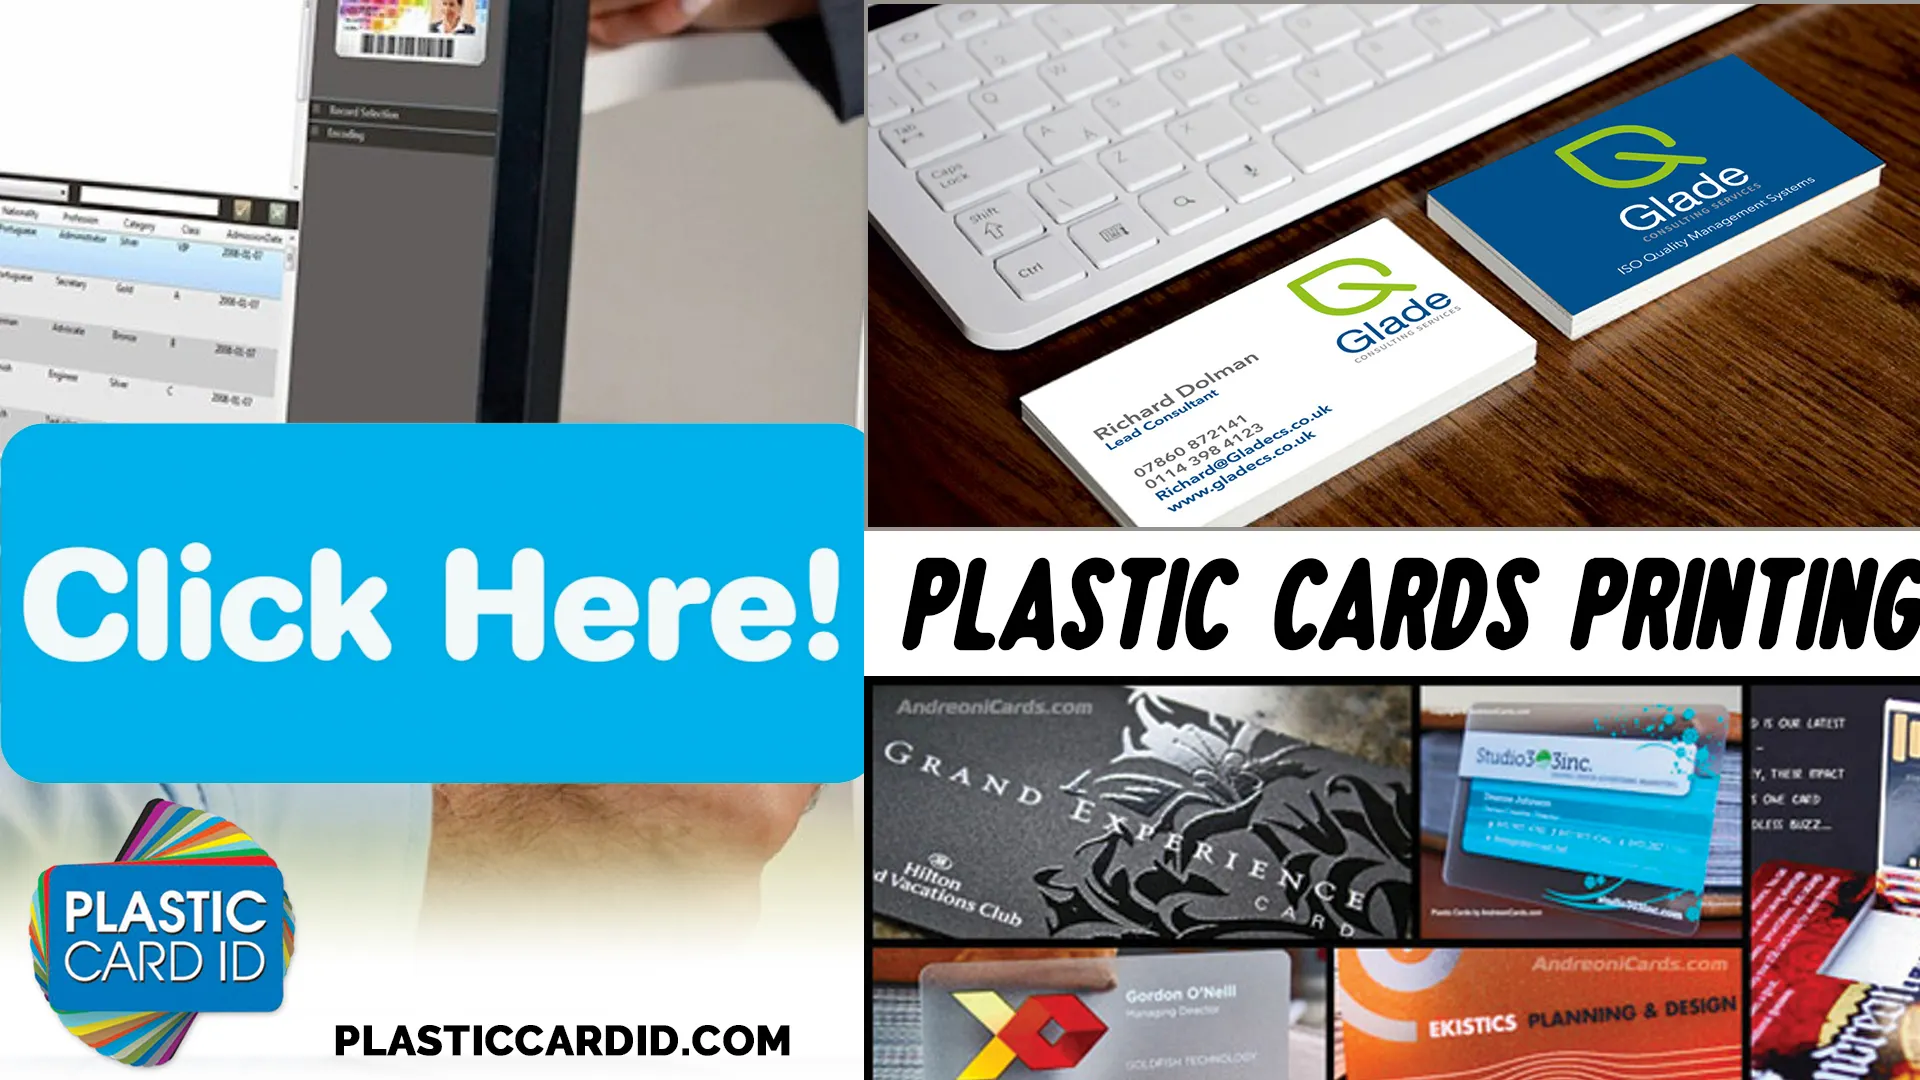 Plastic Card ID




: Champions of Sustainable Card Technologies